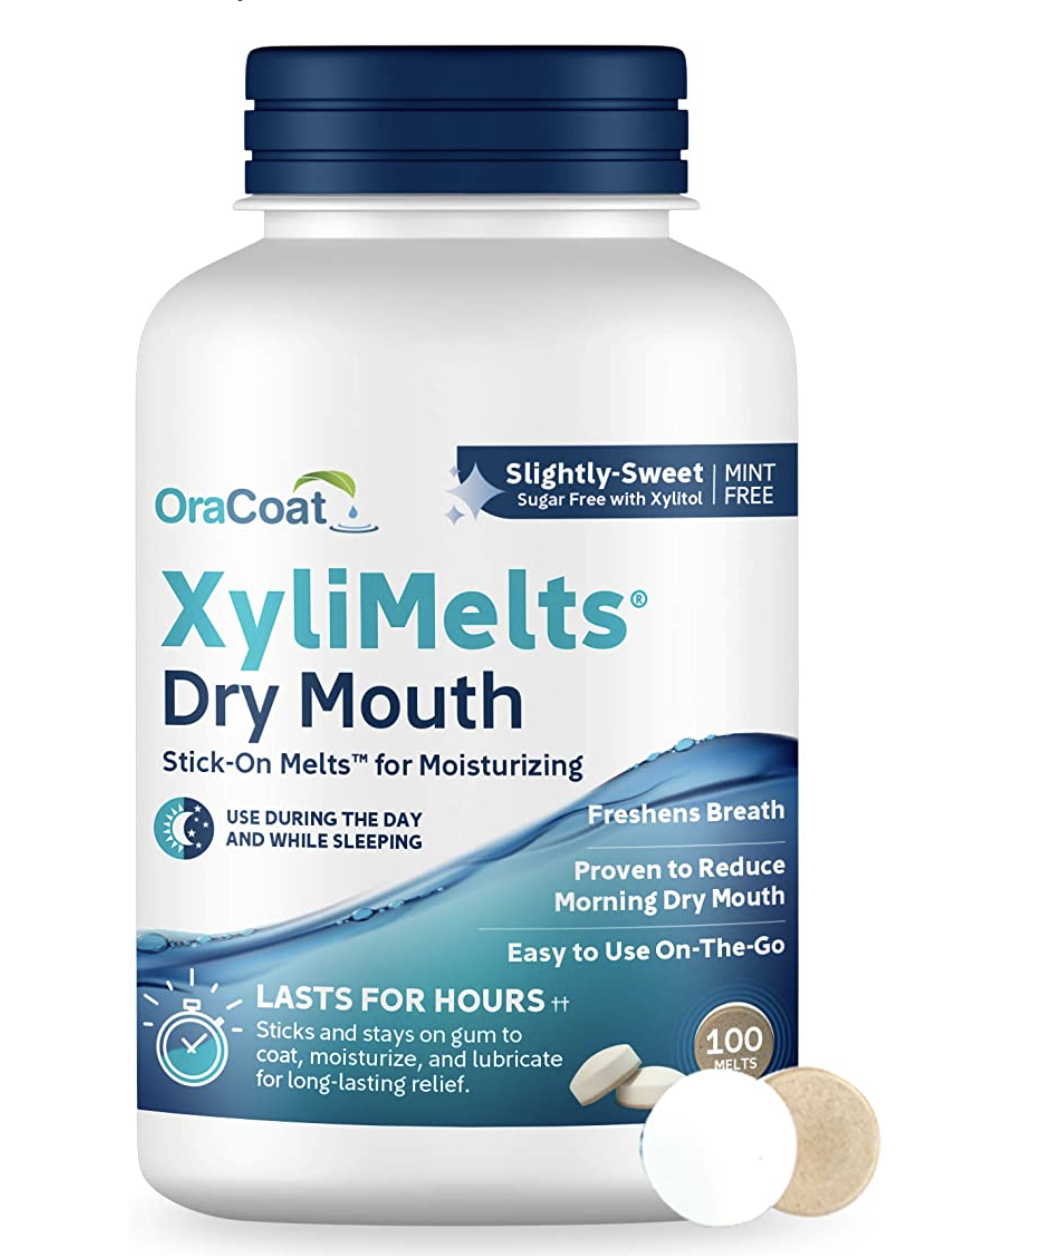 a bottle of xylmets dry mouth tablets